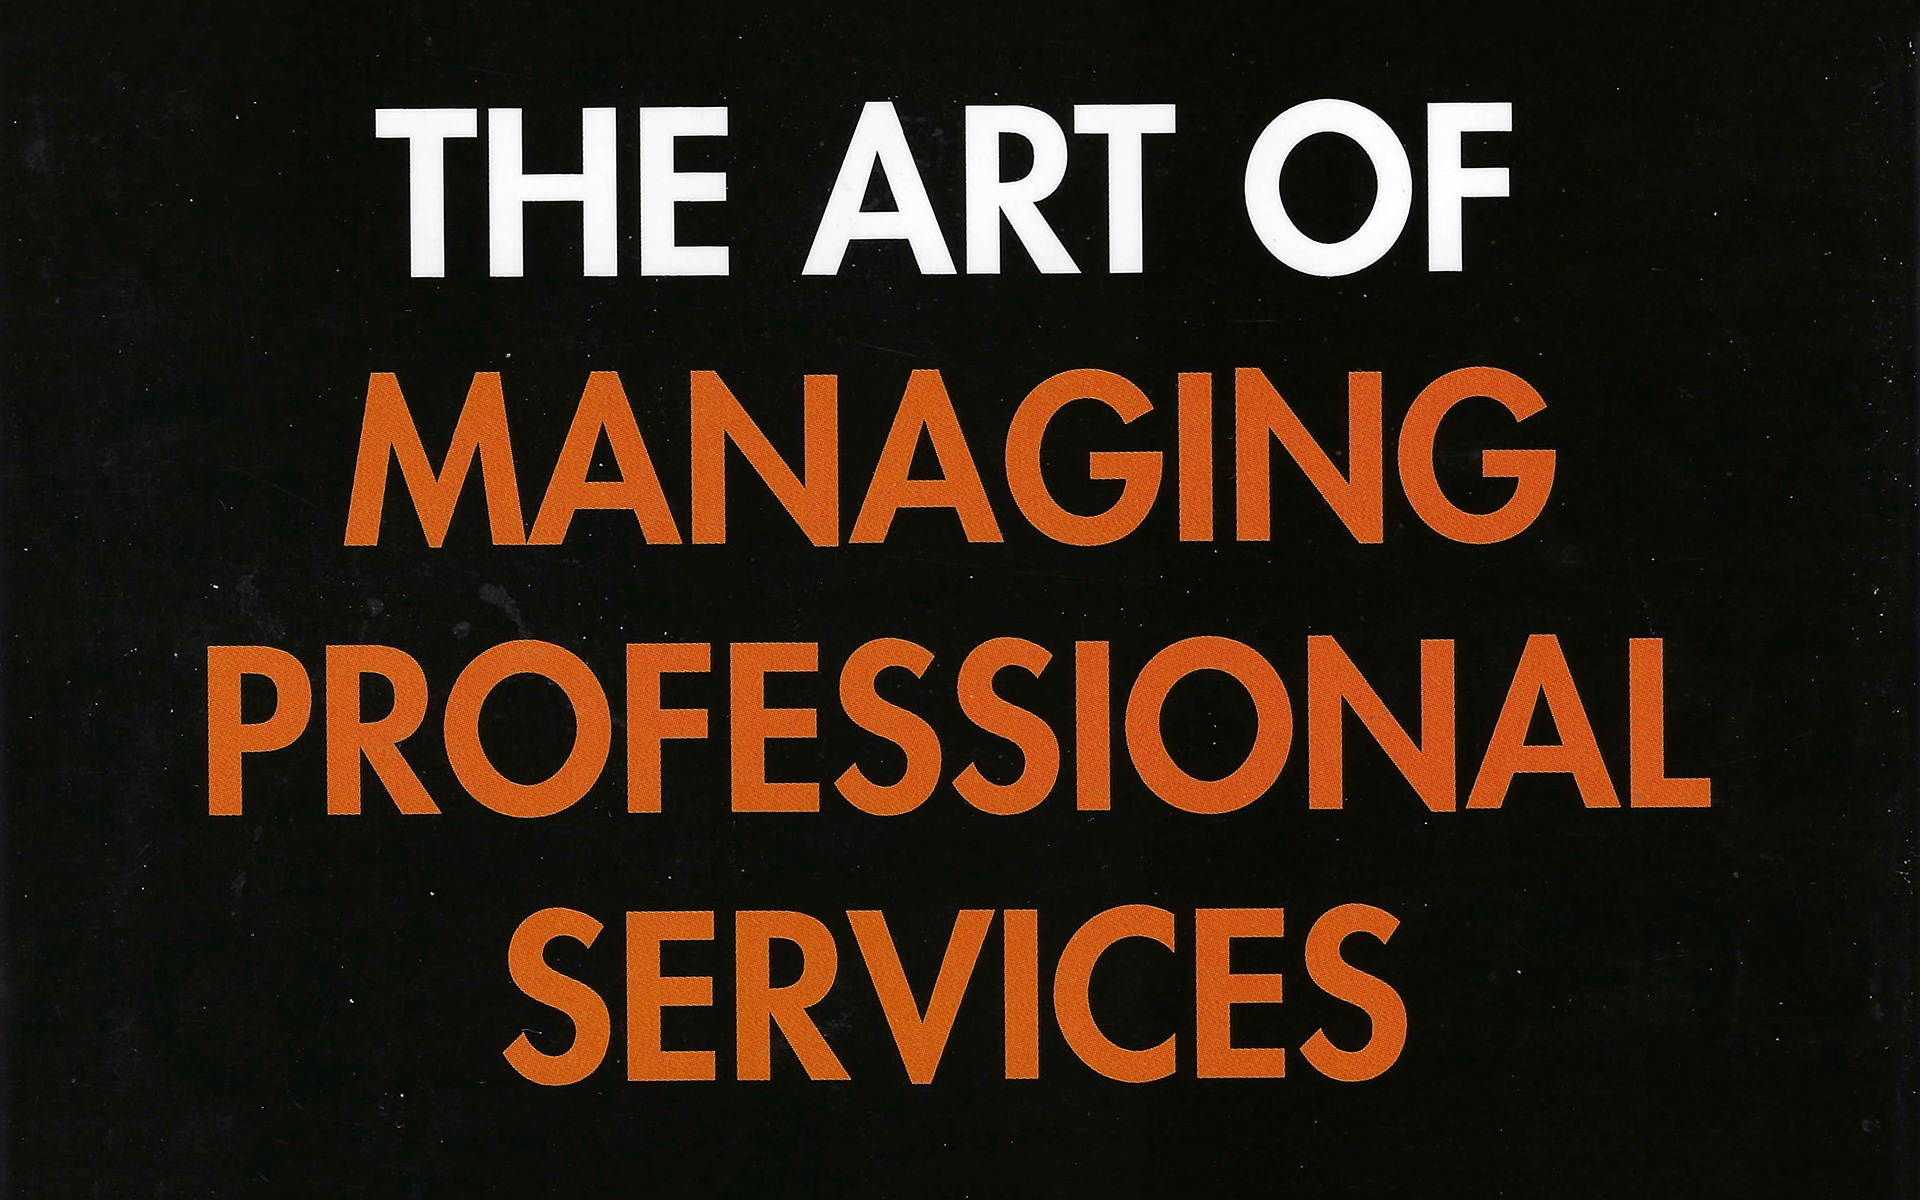 Bookshelf Review: The Art of Managing Professional Services by Maureen Broderick